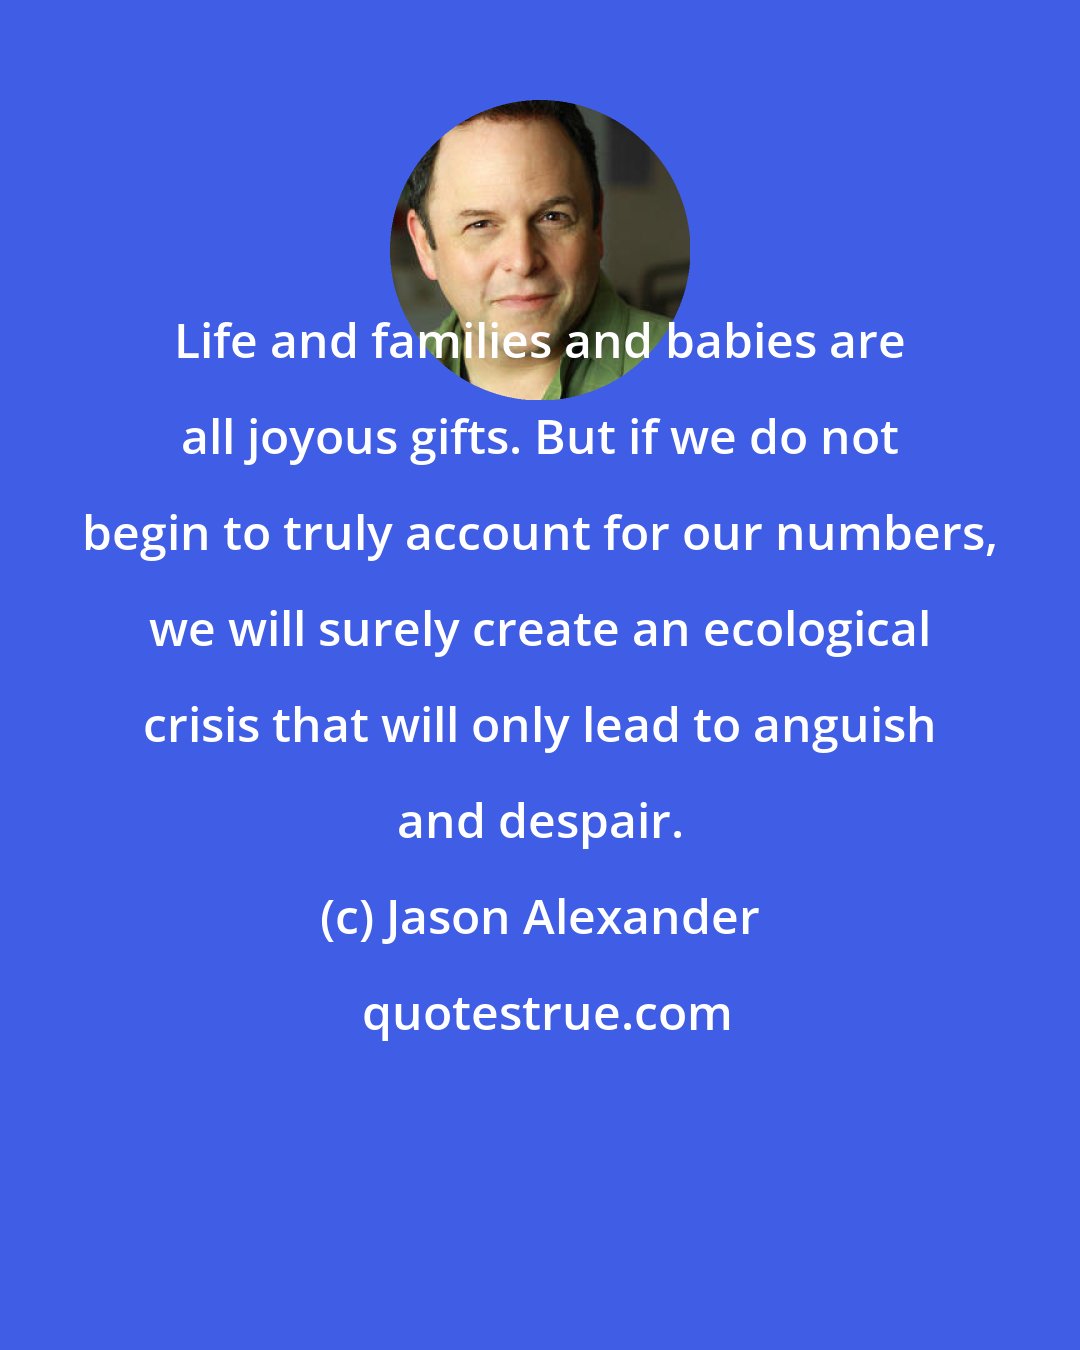 Jason Alexander: Life and families and babies are all joyous gifts. But if we do not begin to truly account for our numbers, we will surely create an ecological crisis that will only lead to anguish and despair.